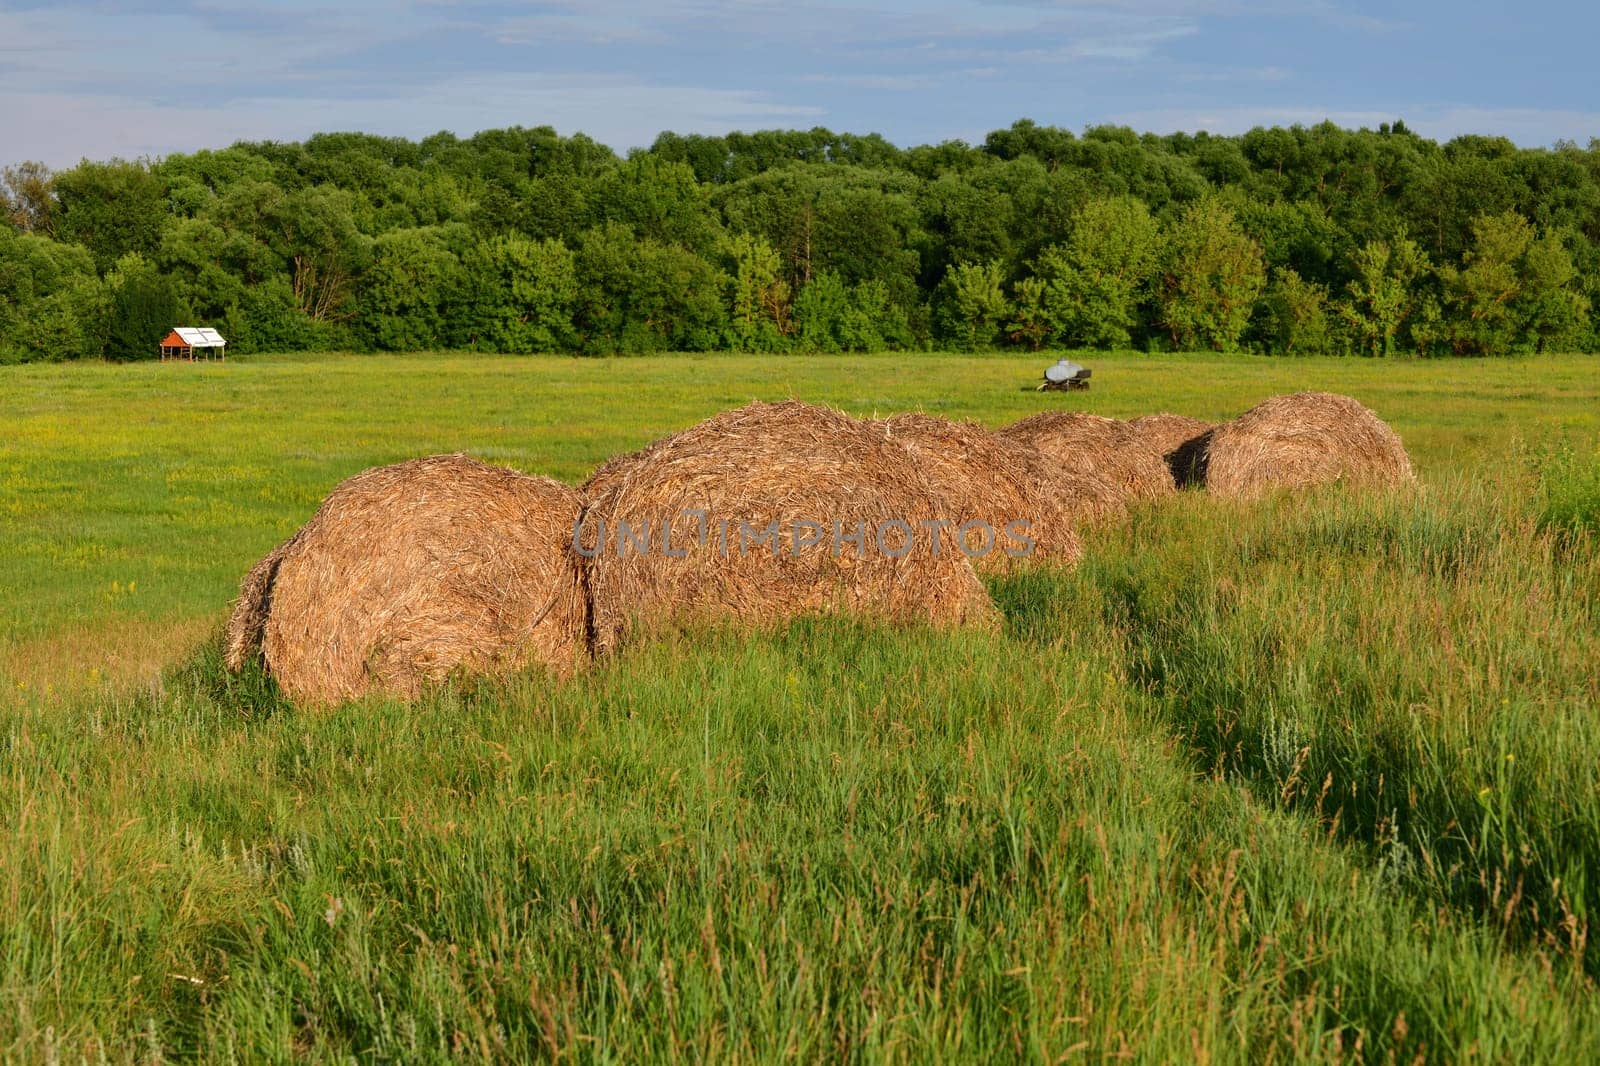 round bales of straw in field in Russia by olgavolodina